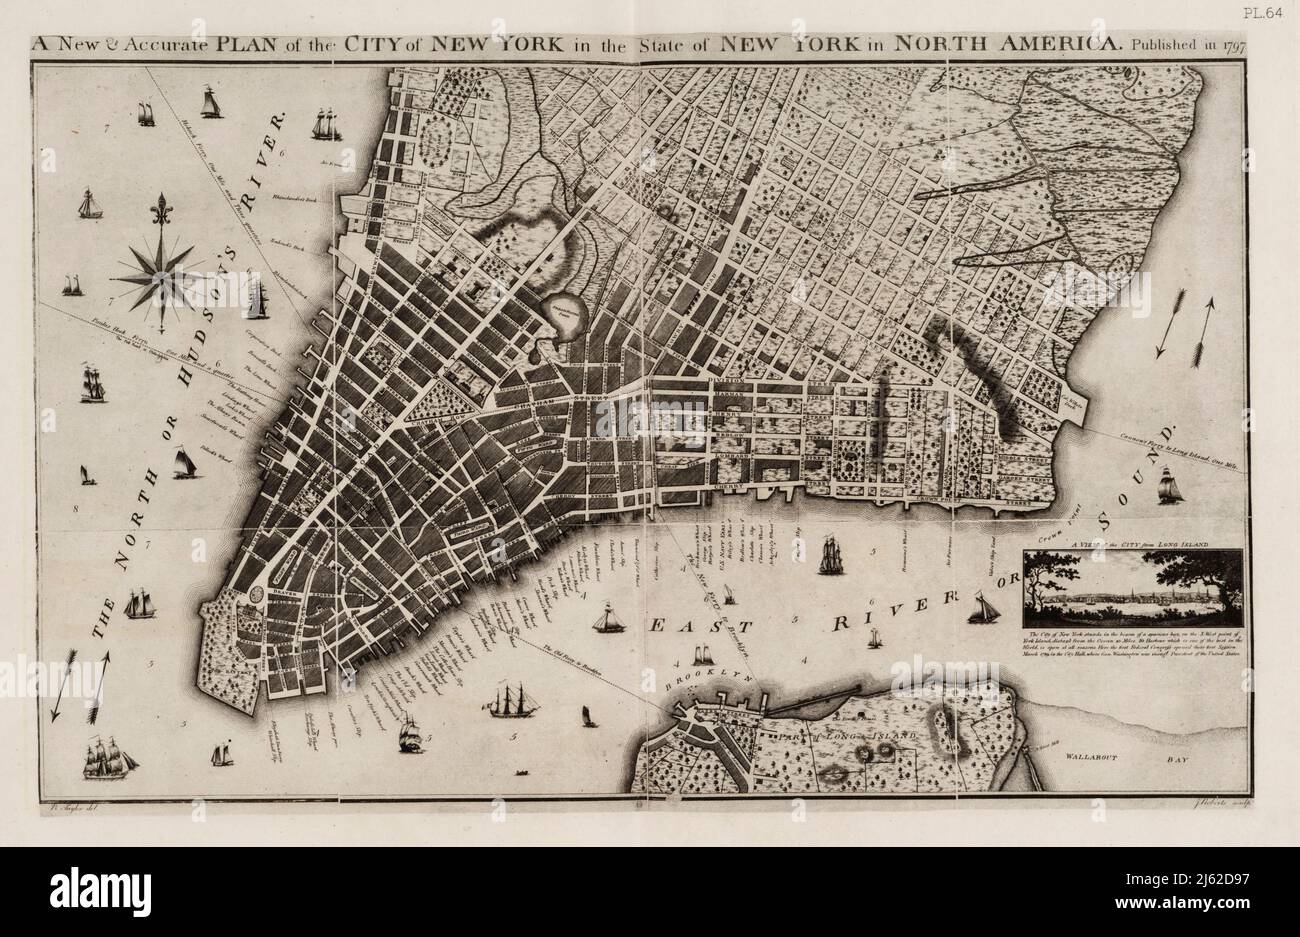 A New & Accurate Plan of the City of New York in the State of New York in Nortrh America Published in 1797 [The Taylor-Roberts Plan] 1796 The period of discovery (1524-1609); the Dutch period (1609-1664). The English period (1664-1763). The Revolutionary period (1763-1783). Period of adjustment and reconstruction; New York as the state and federal capital (1783-1811) from  The iconography of Manhattan Island, 1498-1909 compiled from original sources and illustrated by photo-intaglio reproductions of important maps, plans, views, and documents in public and private collections - Volume 1 by Sto Stock Photo